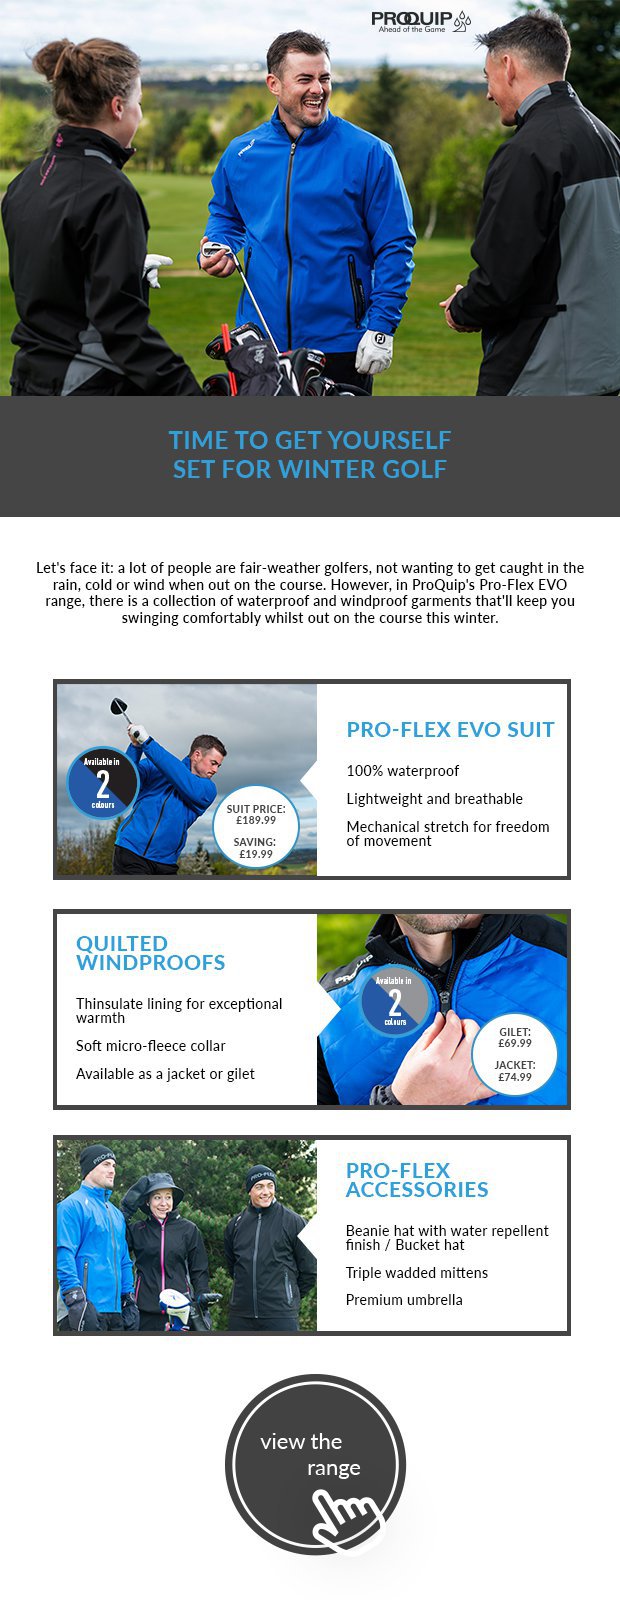 Let's face it: a lot of people are fair-weather golfers, not wanting to get caught in the rain, cold or wind when out on the course. However, in ProQuip's Pro-Flex EVO range, there is a collection of waterproof and windproof garments that'll keep you swinging comfortably whilst out on the course this winter.